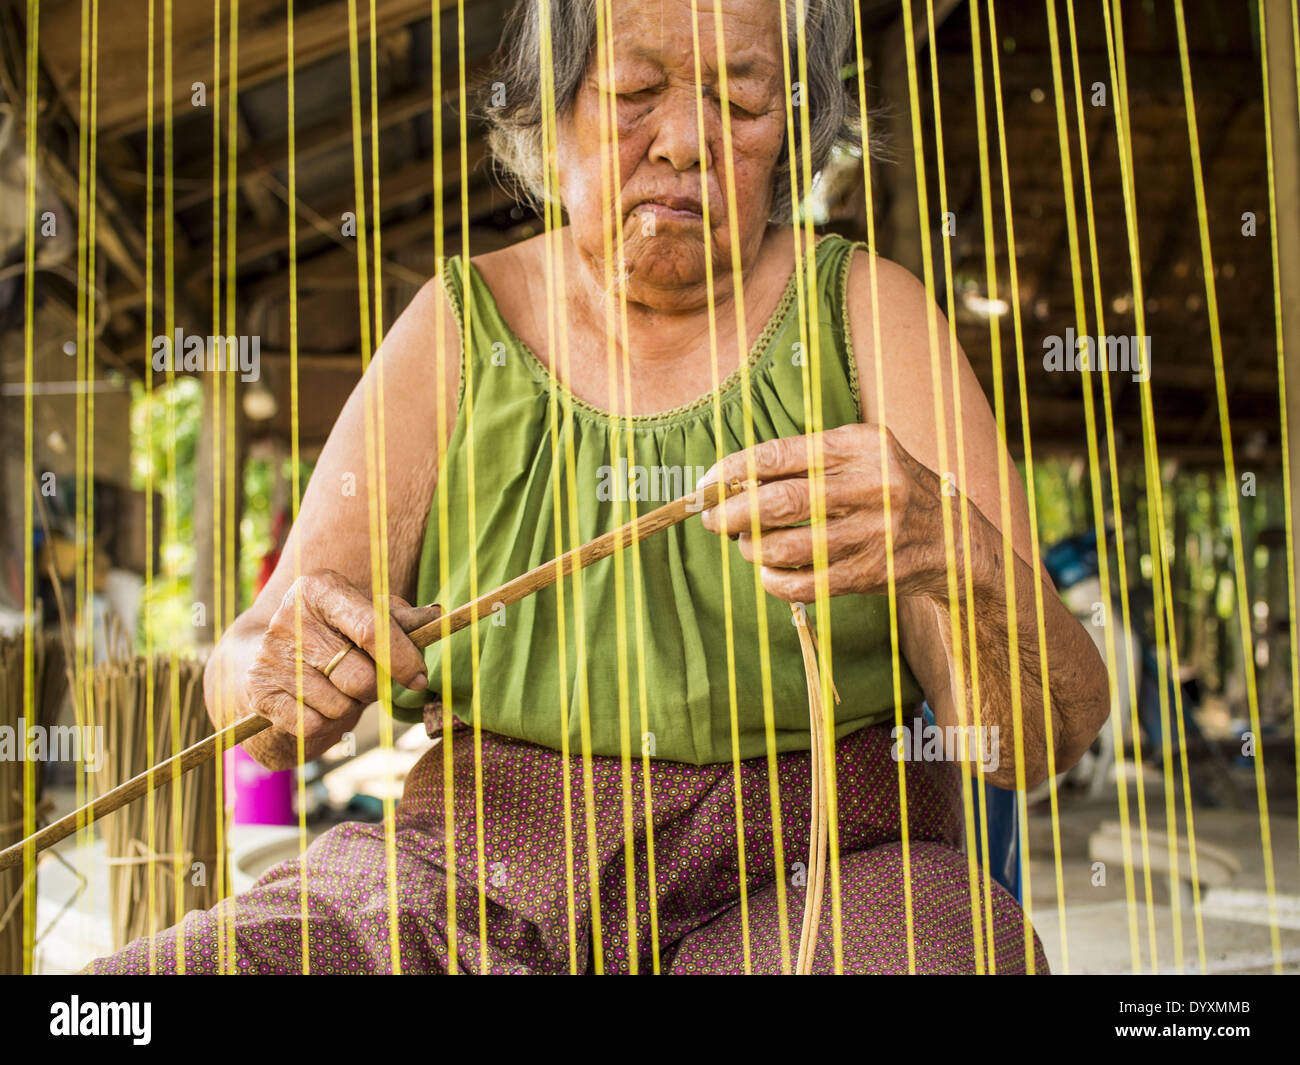 April 25, 2014 - Mae Chan, Chiang Rai, Thailand - An elderly woman weaves papyrus reed matts by hand at her family home in Mae Chan, Chiang Rai province, Thailand. Families in Chiang Rai province still make woven reed mats by hand. The mats are used around the house as an impromptu table, and farmers as something to spread out on the ground during lunch, like a picnic blanket. Some families use them as mattresses to sleep on. They cost anywhere from 15Baht (.50Â¢ US) to 150Baht ($5.00 US) depending on size. (Credit Image: © Jack Kurtz/ZUMAPRESS.com) Stock Photo